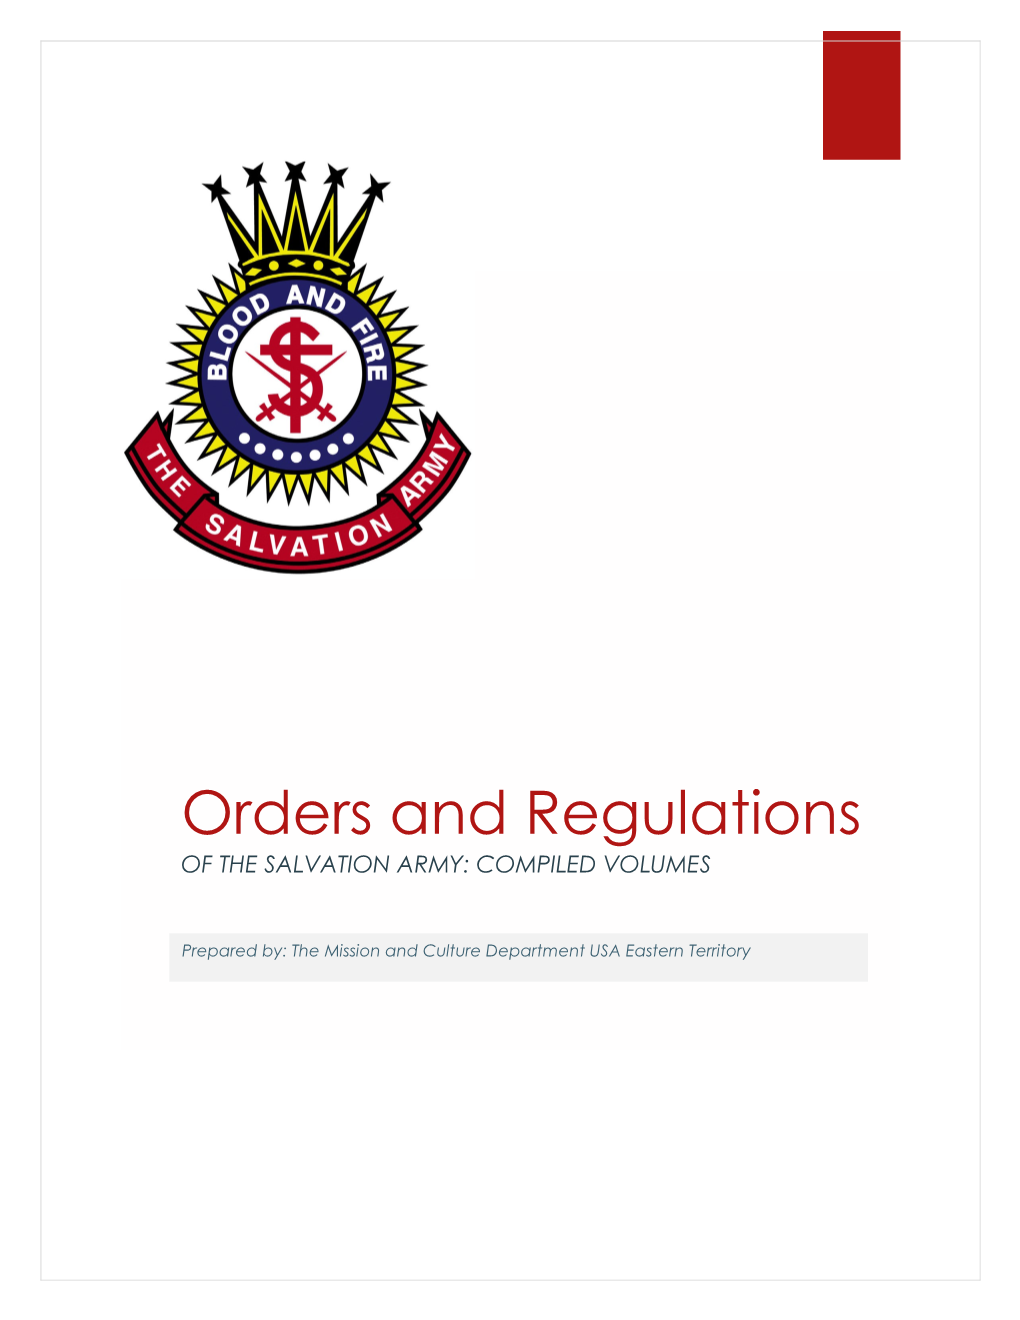 Orders and Regulations of the SALVATION ARMY: COMPILED VOLUMES